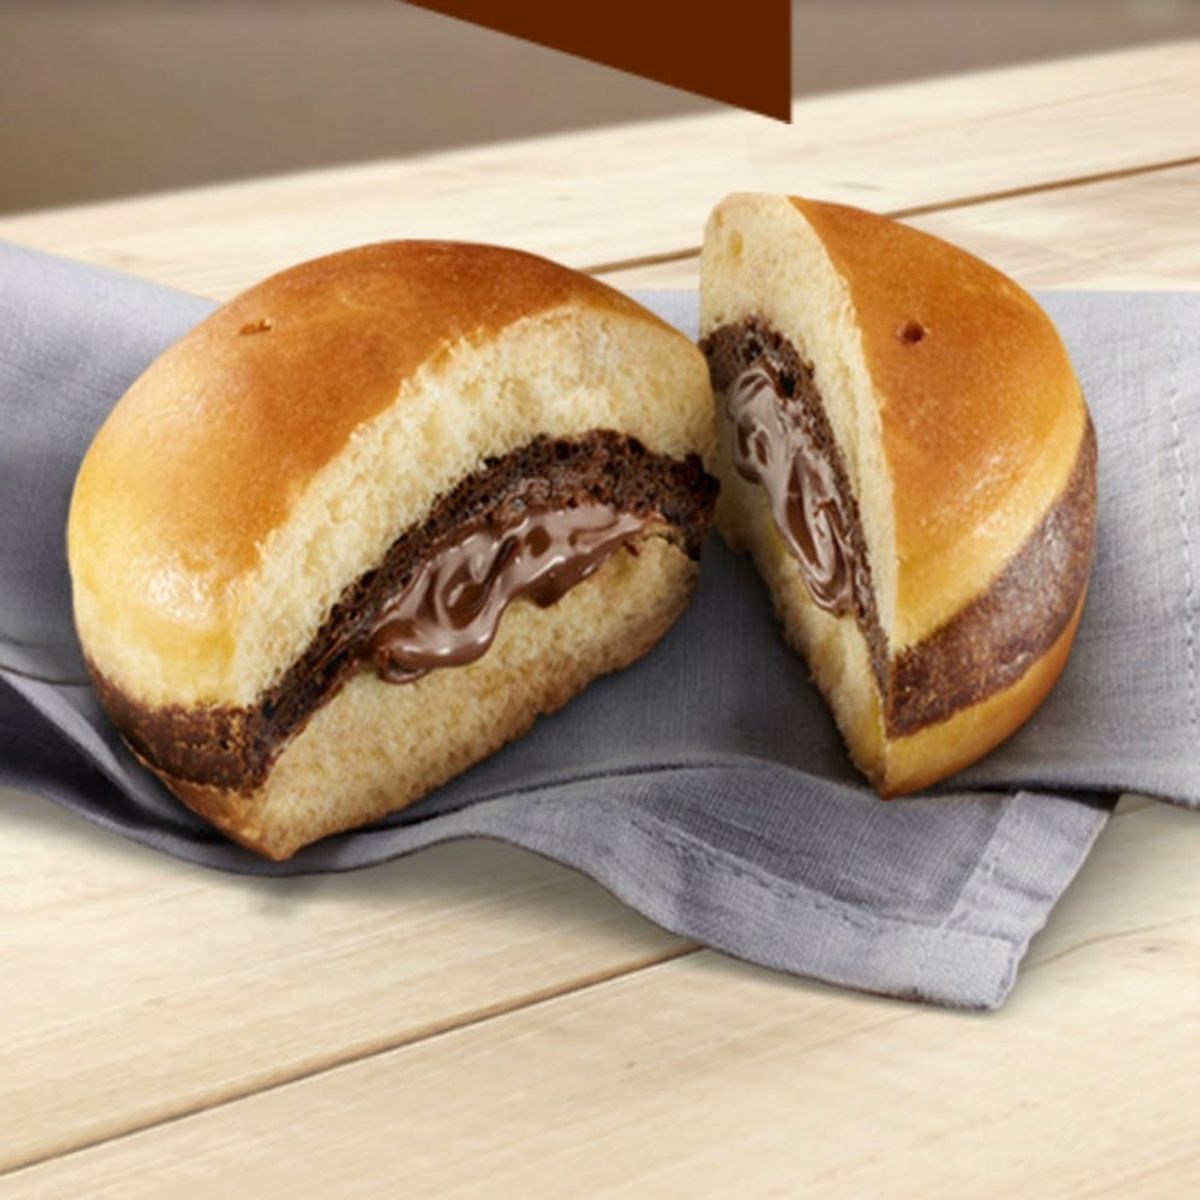 WTF: McDonald’s Italy Is Rolling Out a Nutella Burger